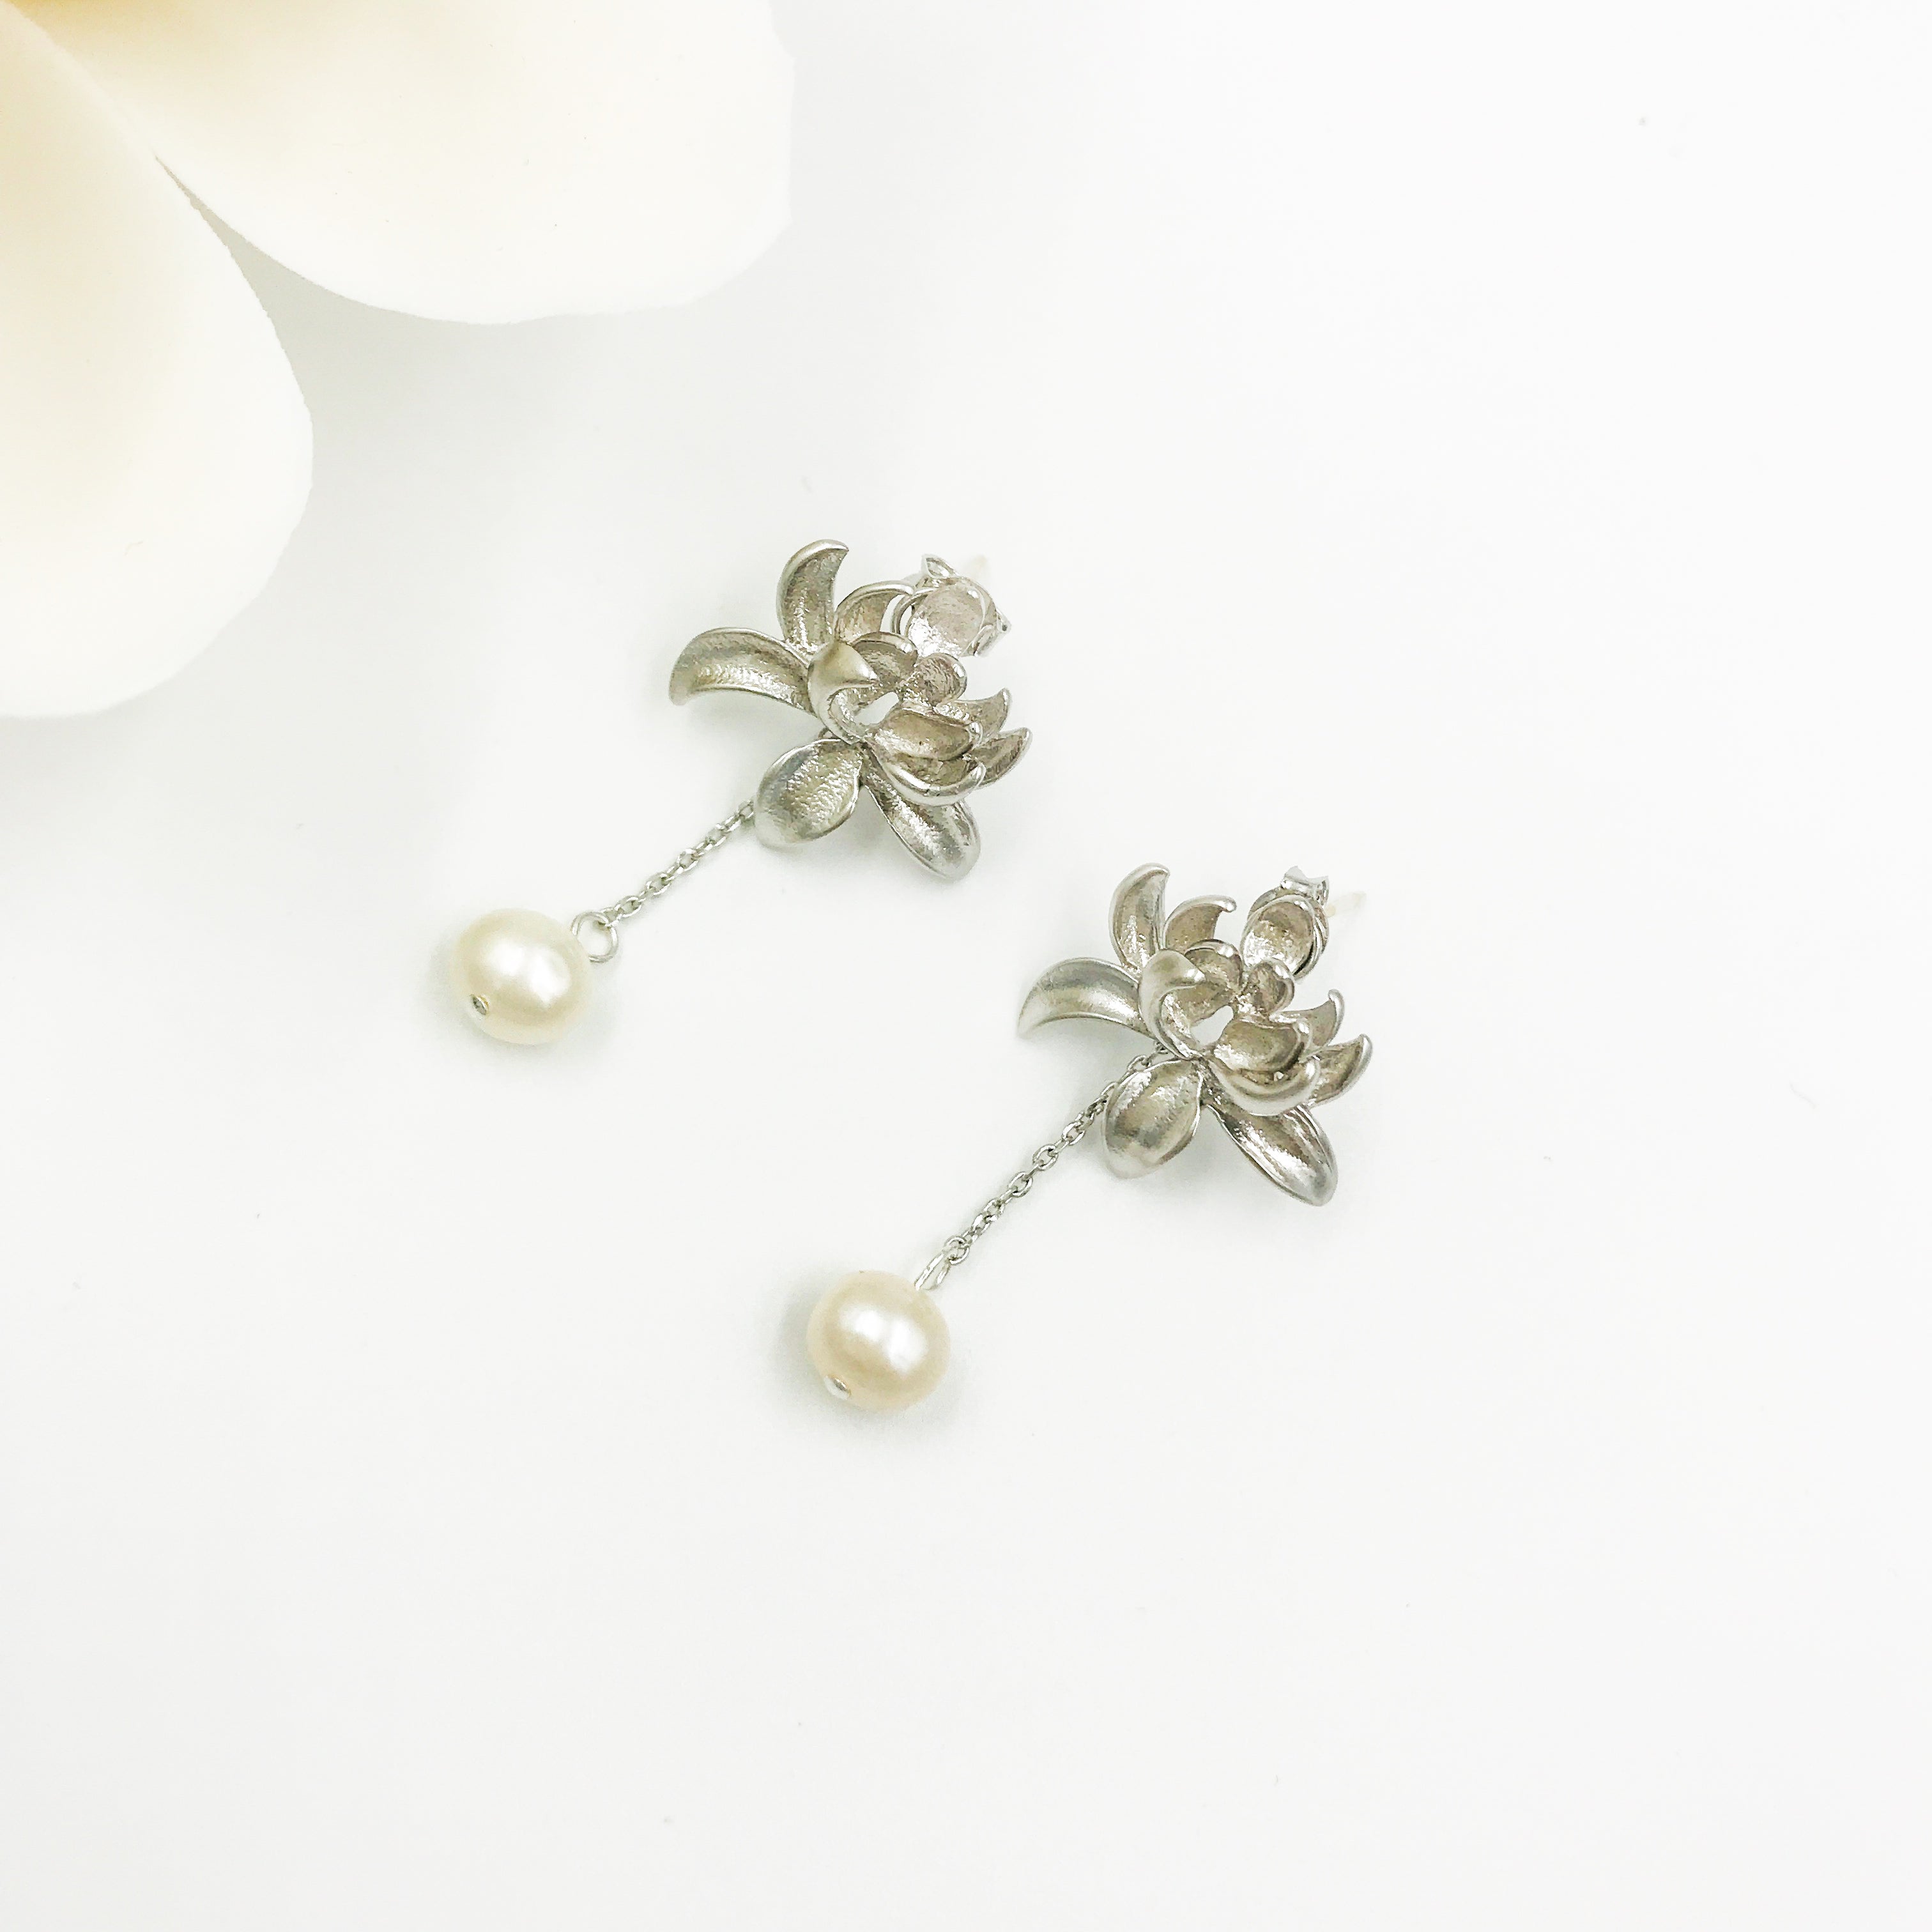 Lotus Pearl Stud Earrings with Sterling Silver Post Silver